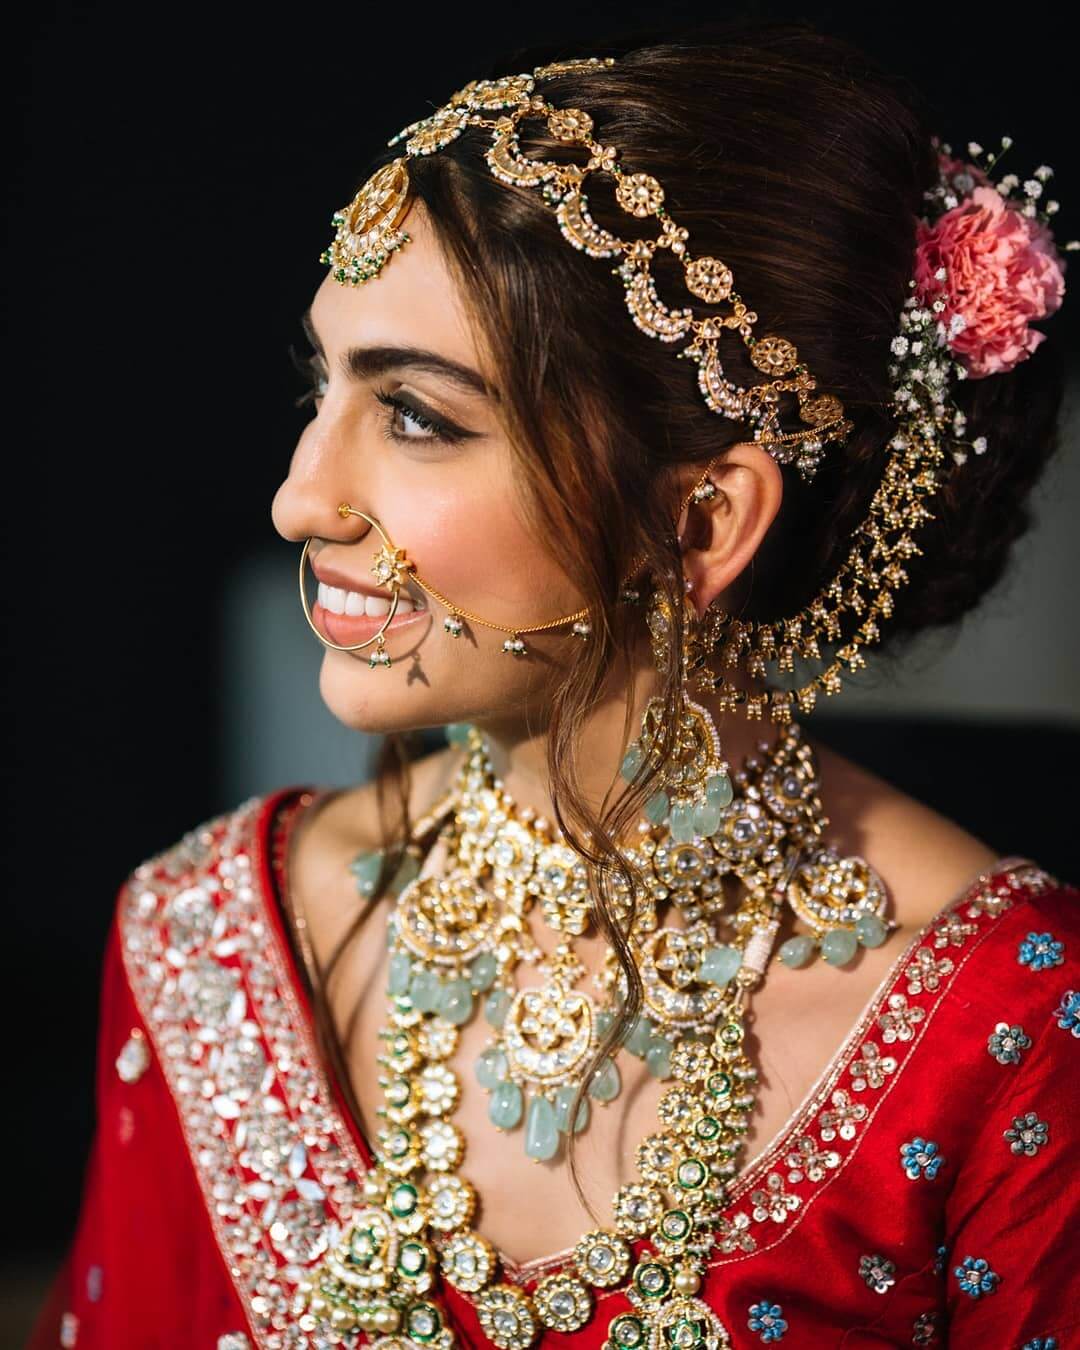 Designer Mrunalini Rao gives her style advice for 2021 brides